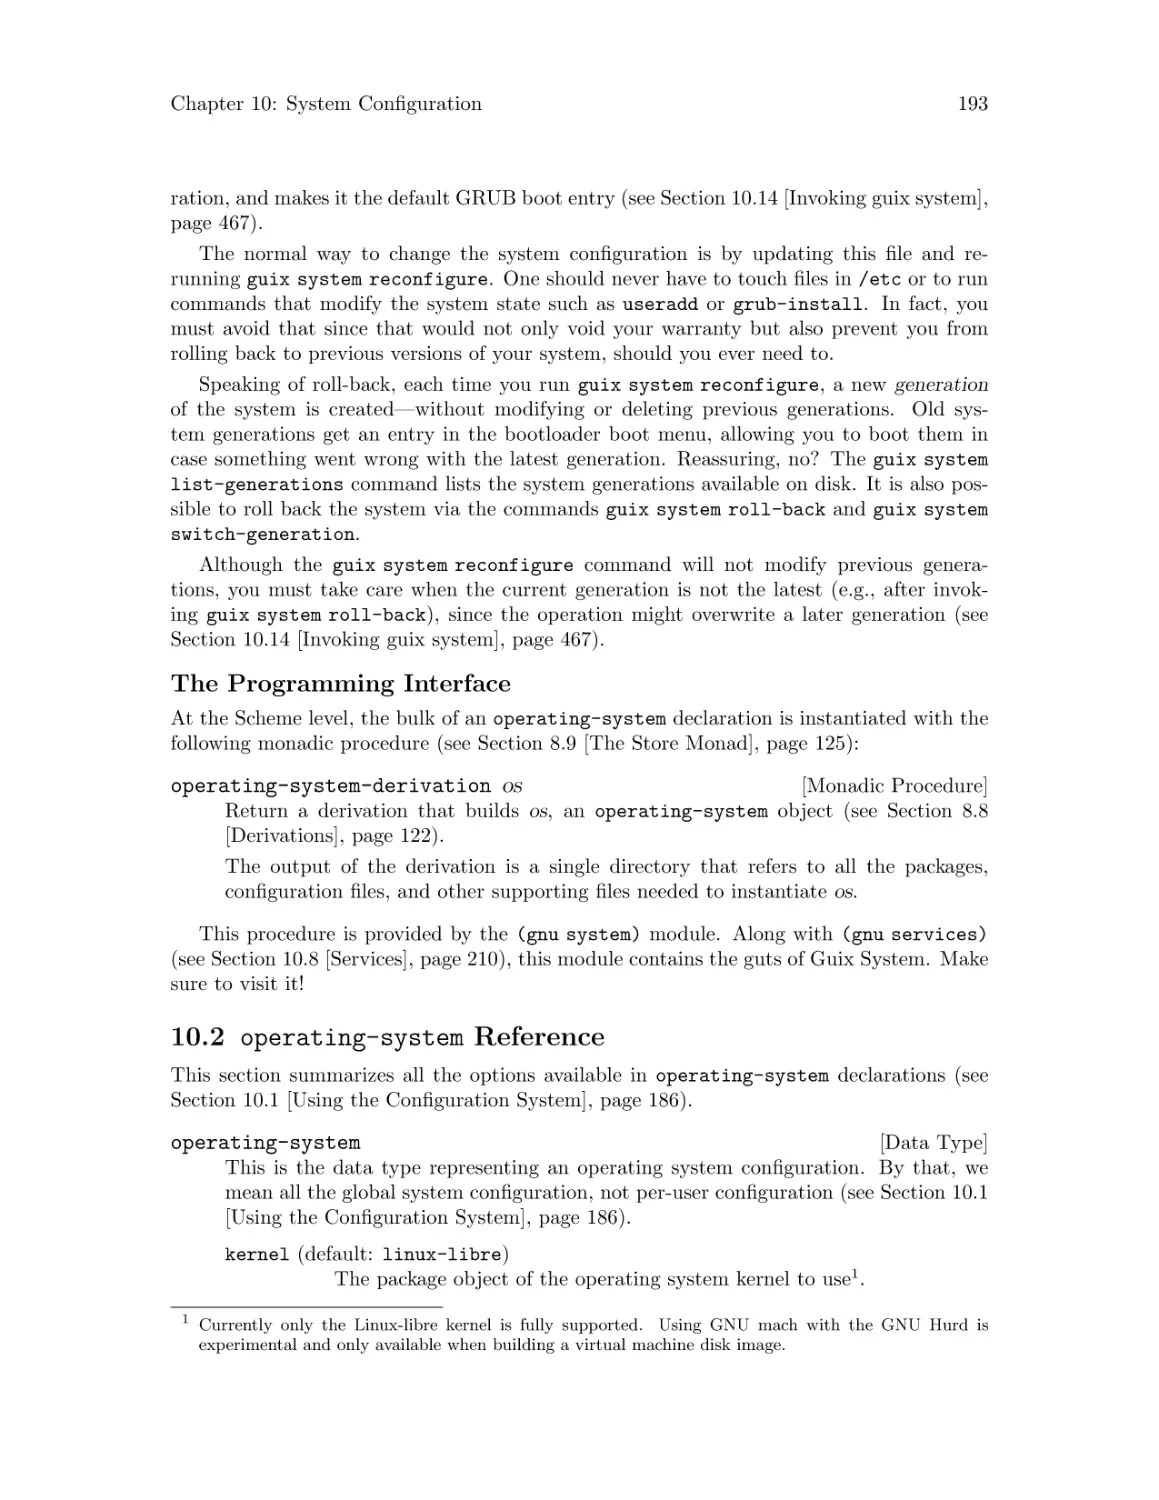 The Programming Interface
operating-system Reference